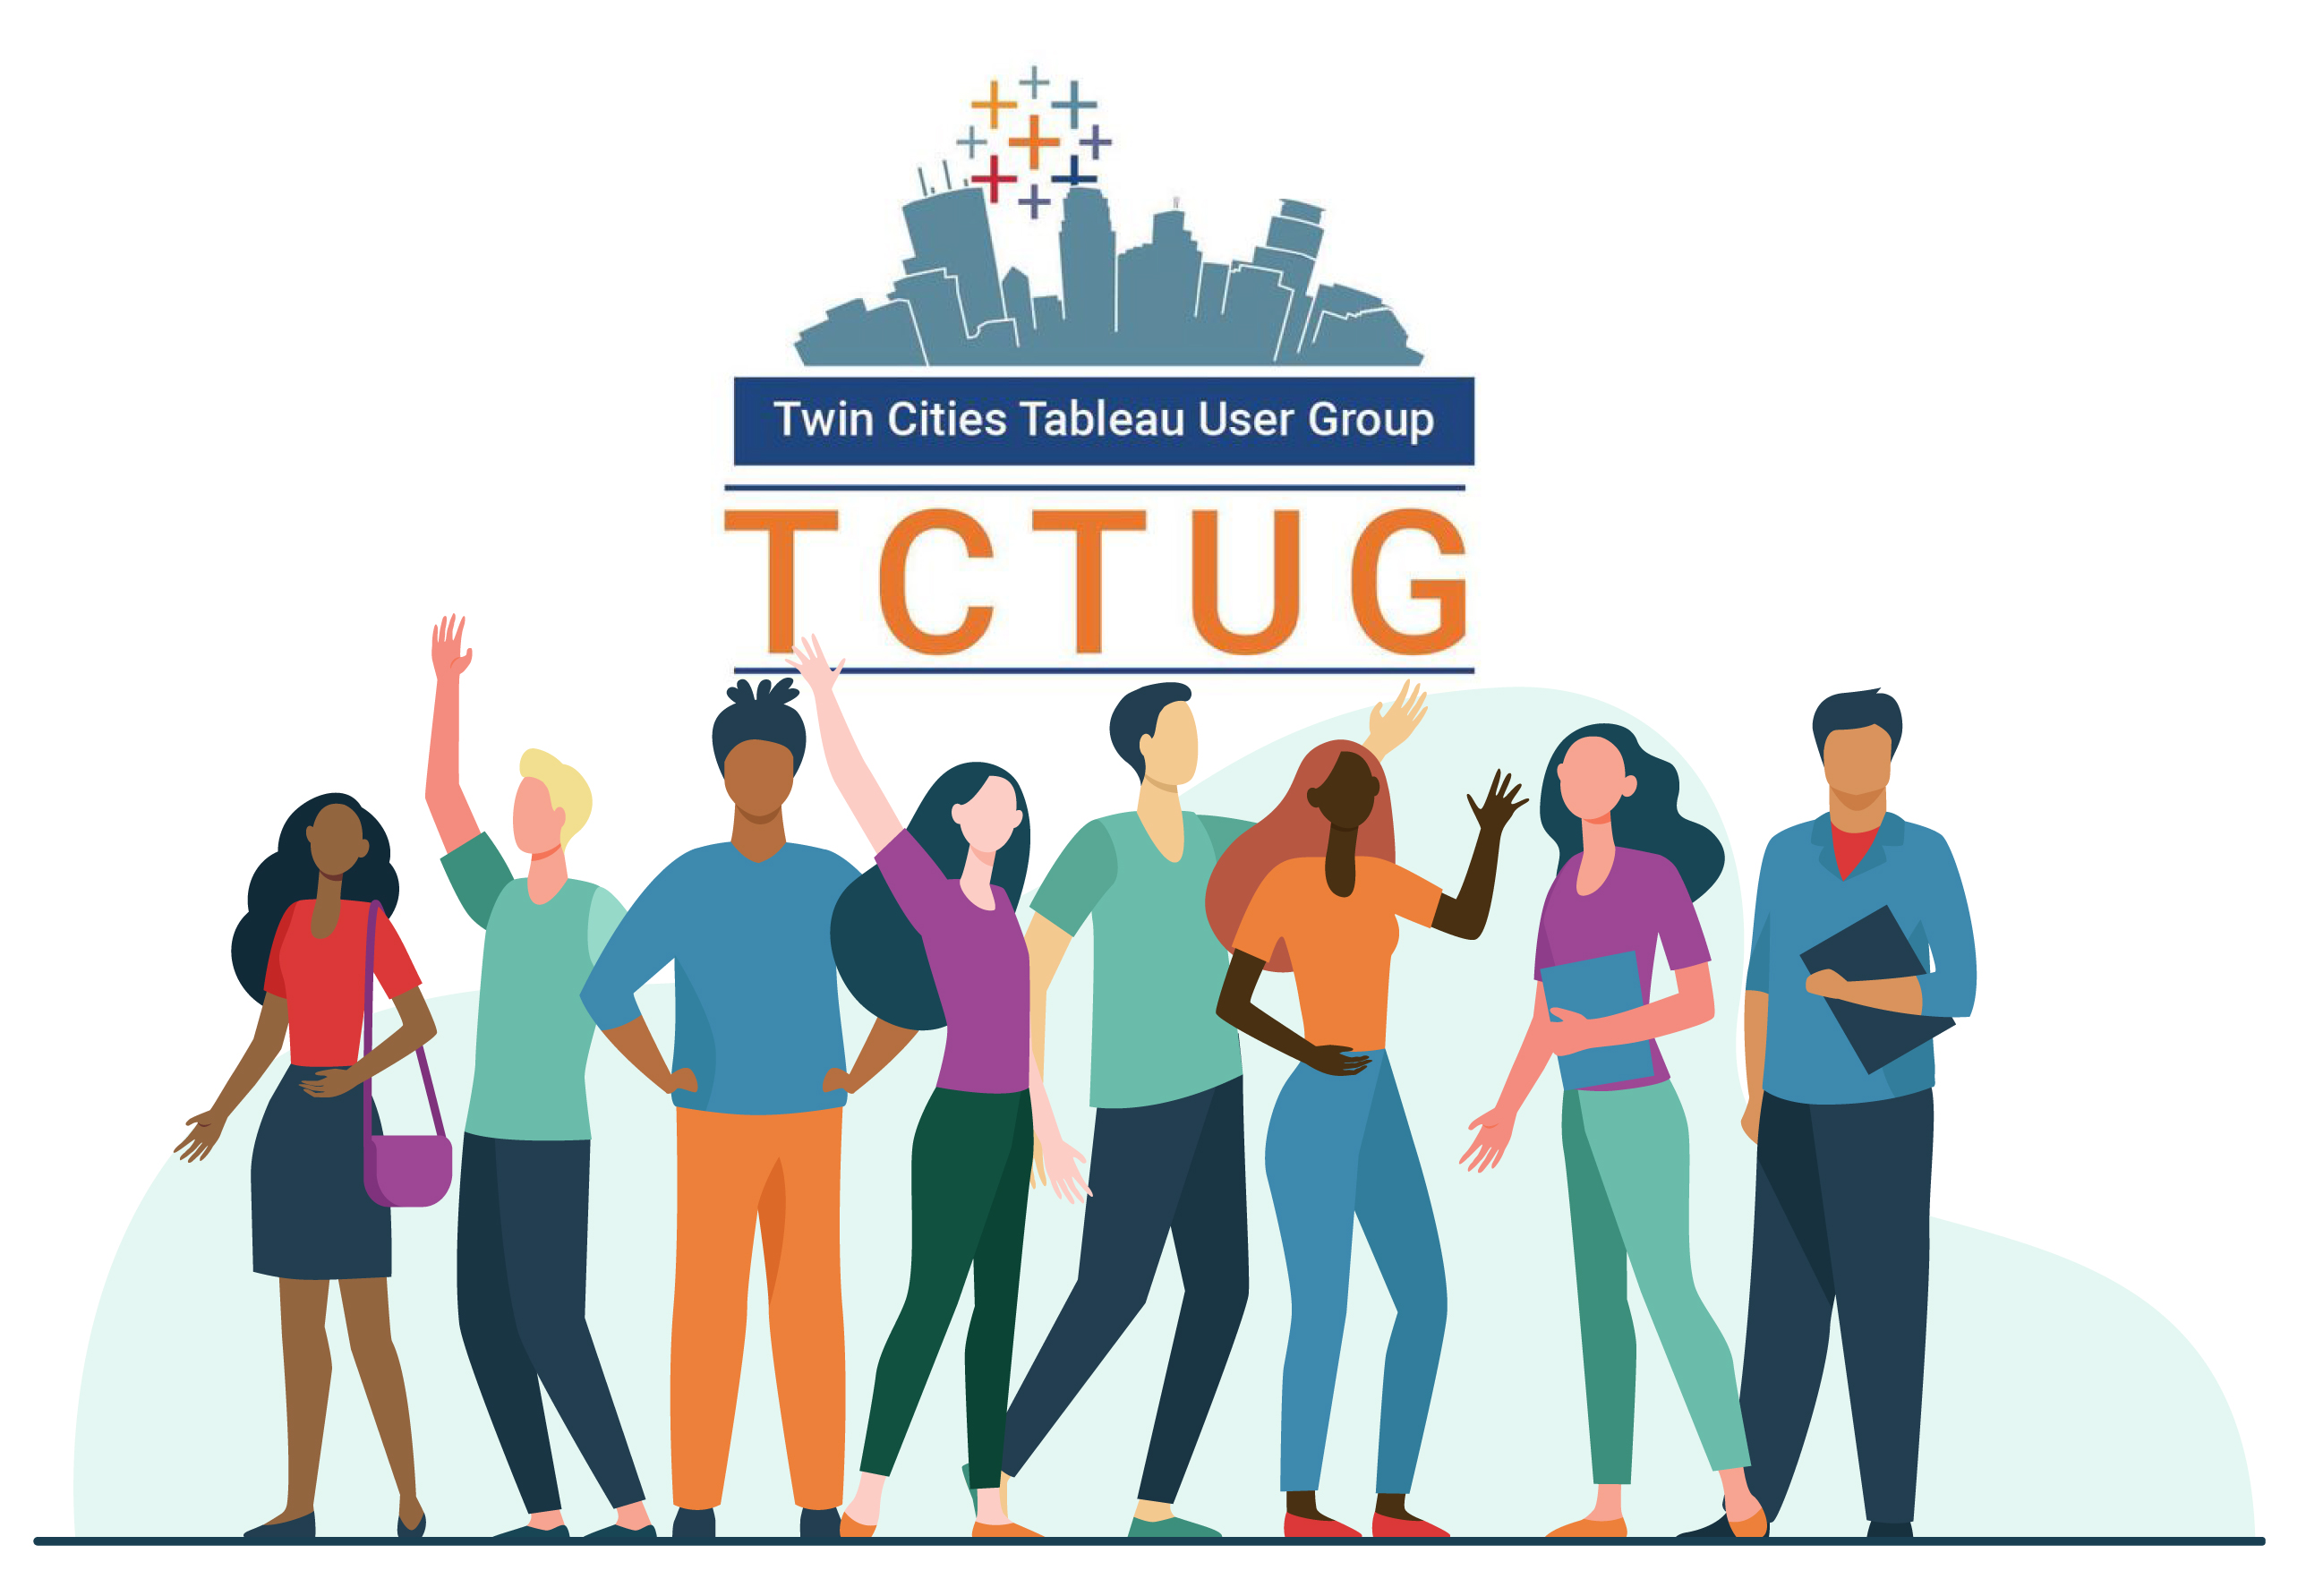 Join the Twin Cities Tableau User Group for great resources